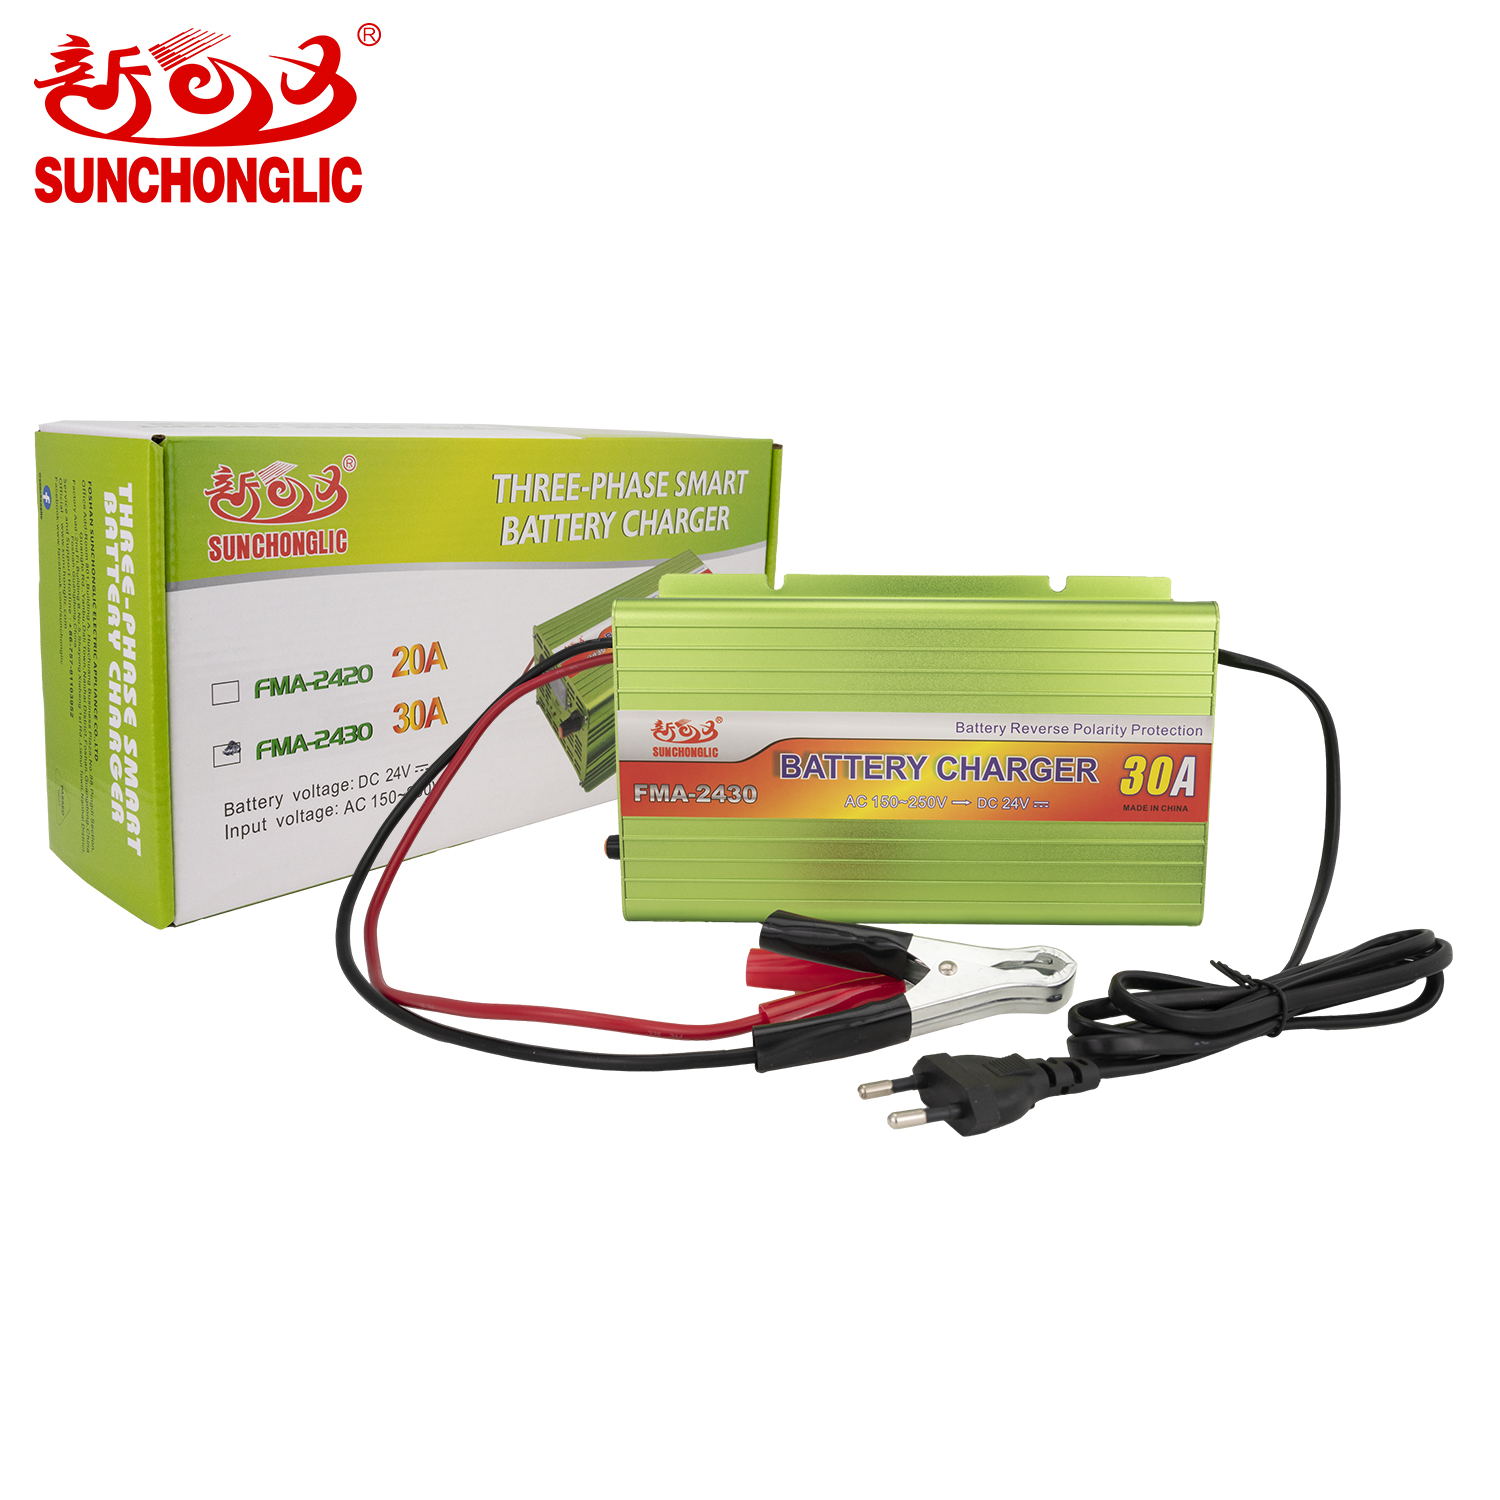 Sunchonglic portable 24V 30A three phase smart AGM GEL lead acid car battery charger